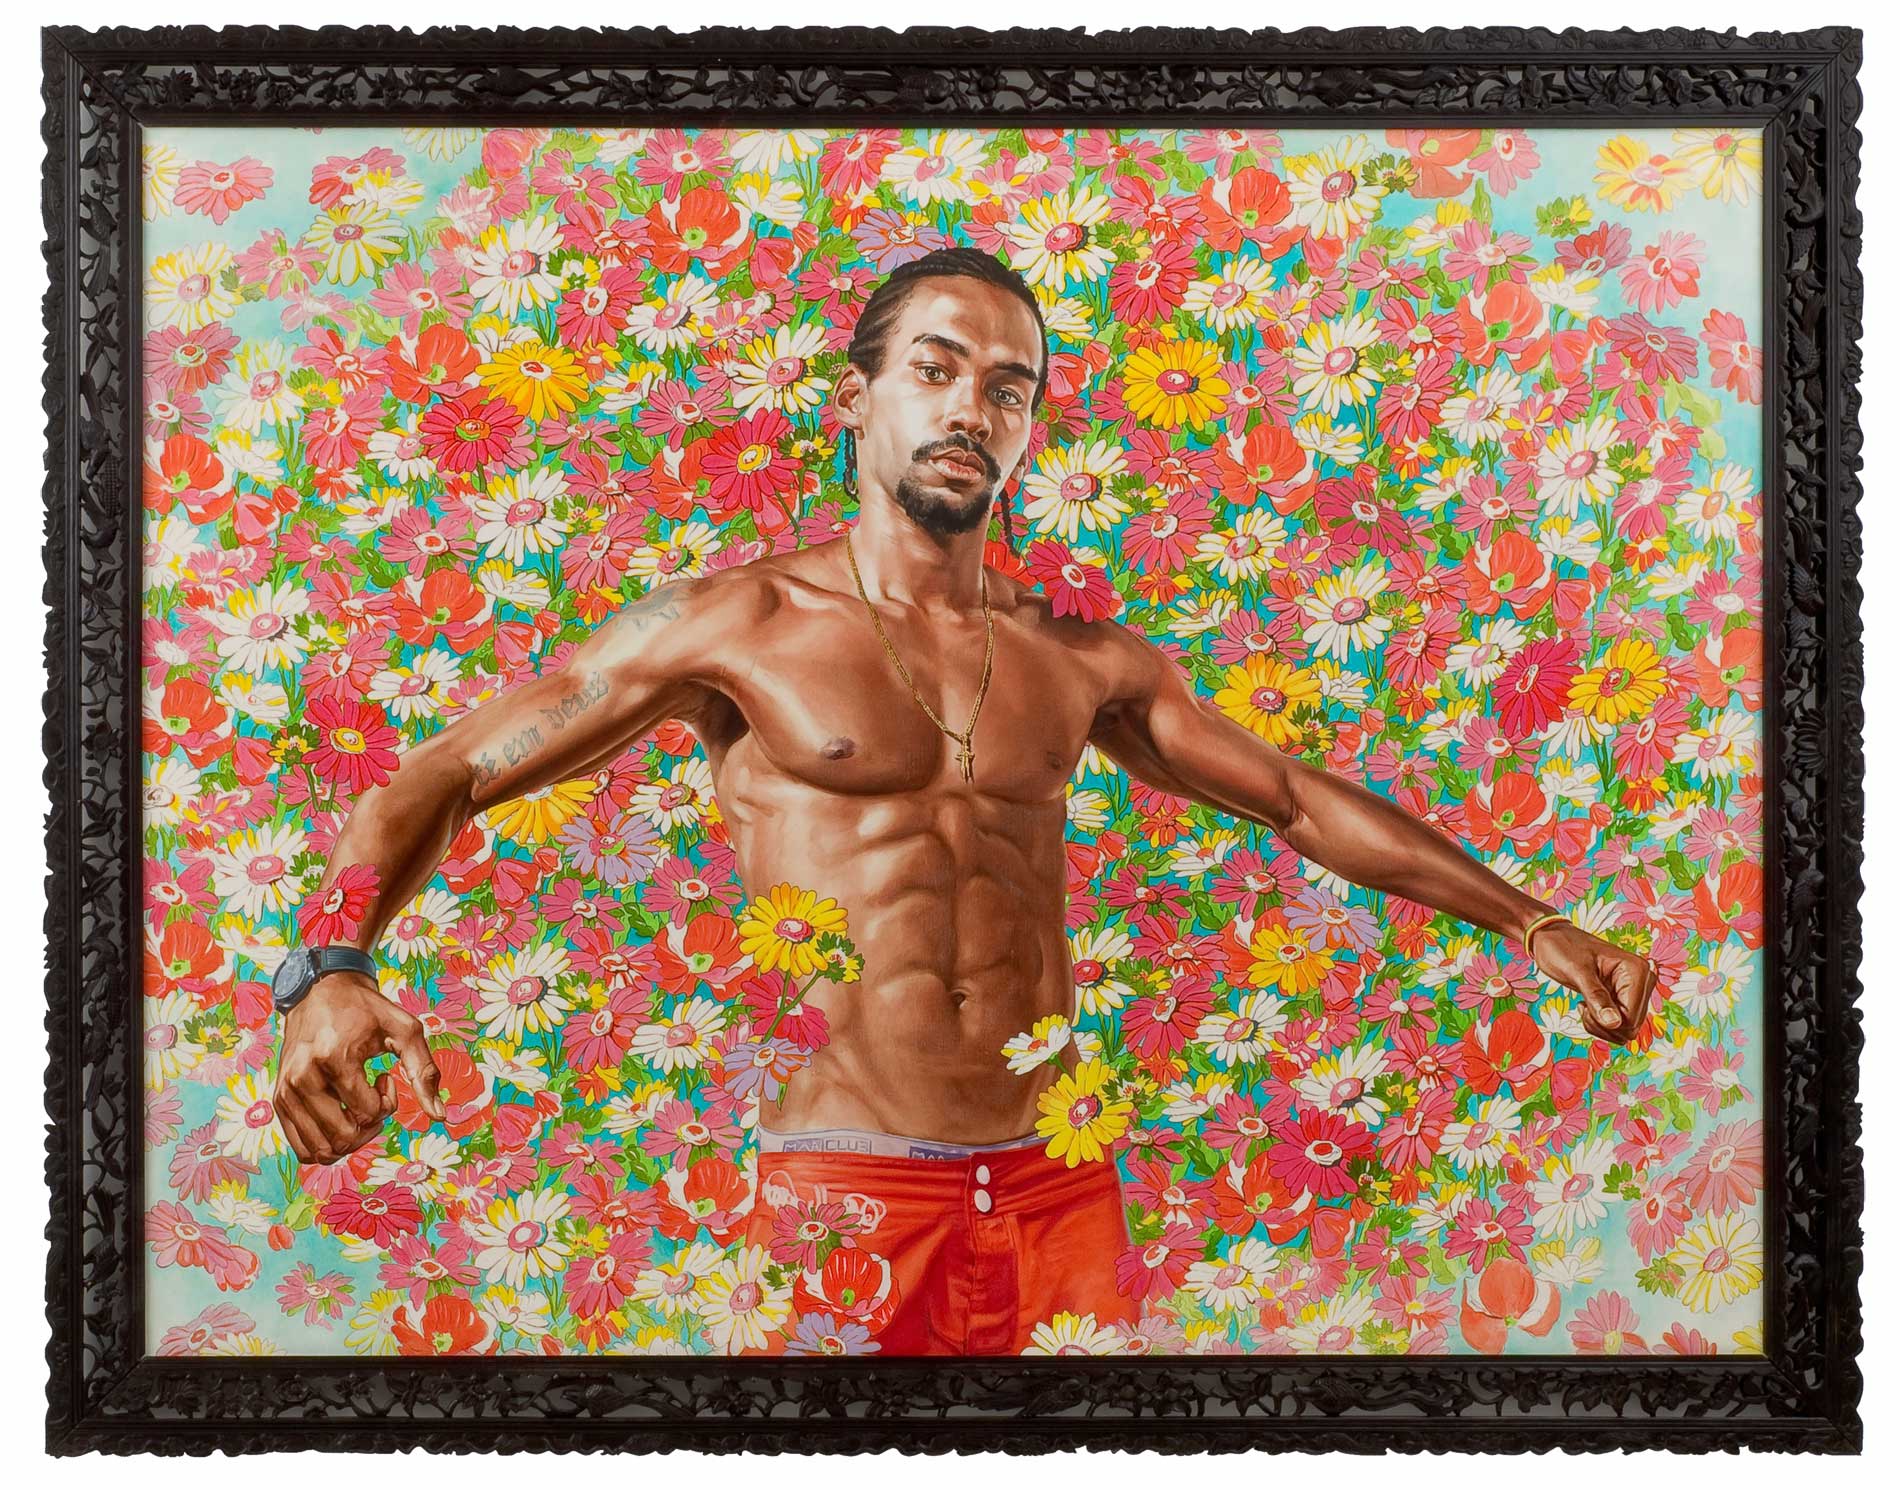 Kehinde Wiley | The World Stage: Brazil | Santos Dumont - The Father of Aviation III, 2009 Oil on Canvas. | 10